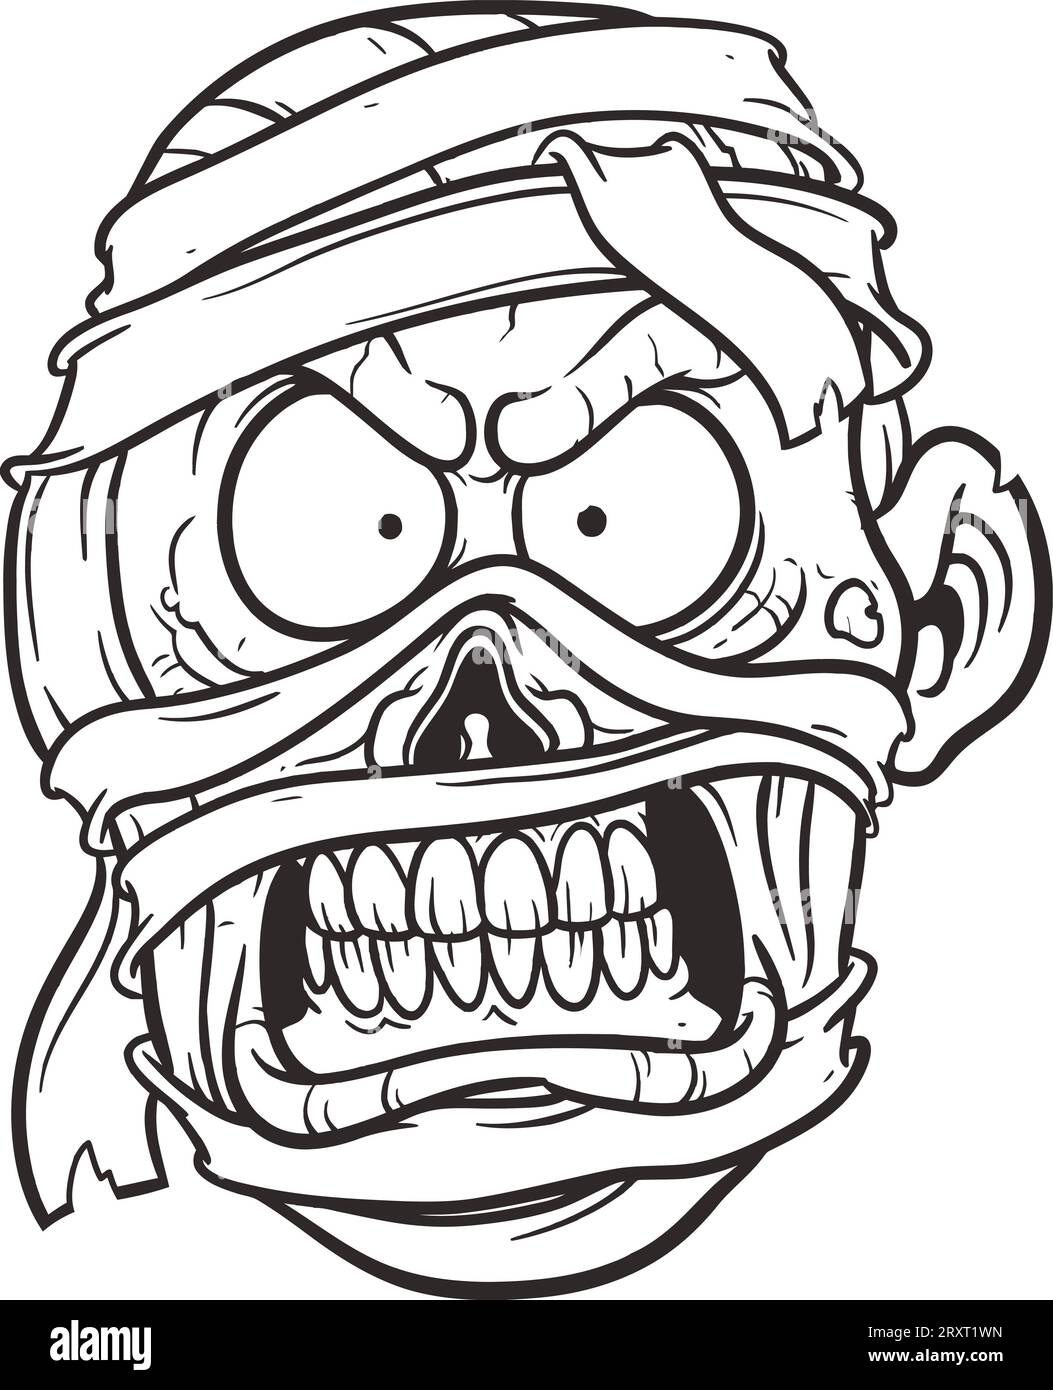 The Zombie Coloring page for kids Stock Photo